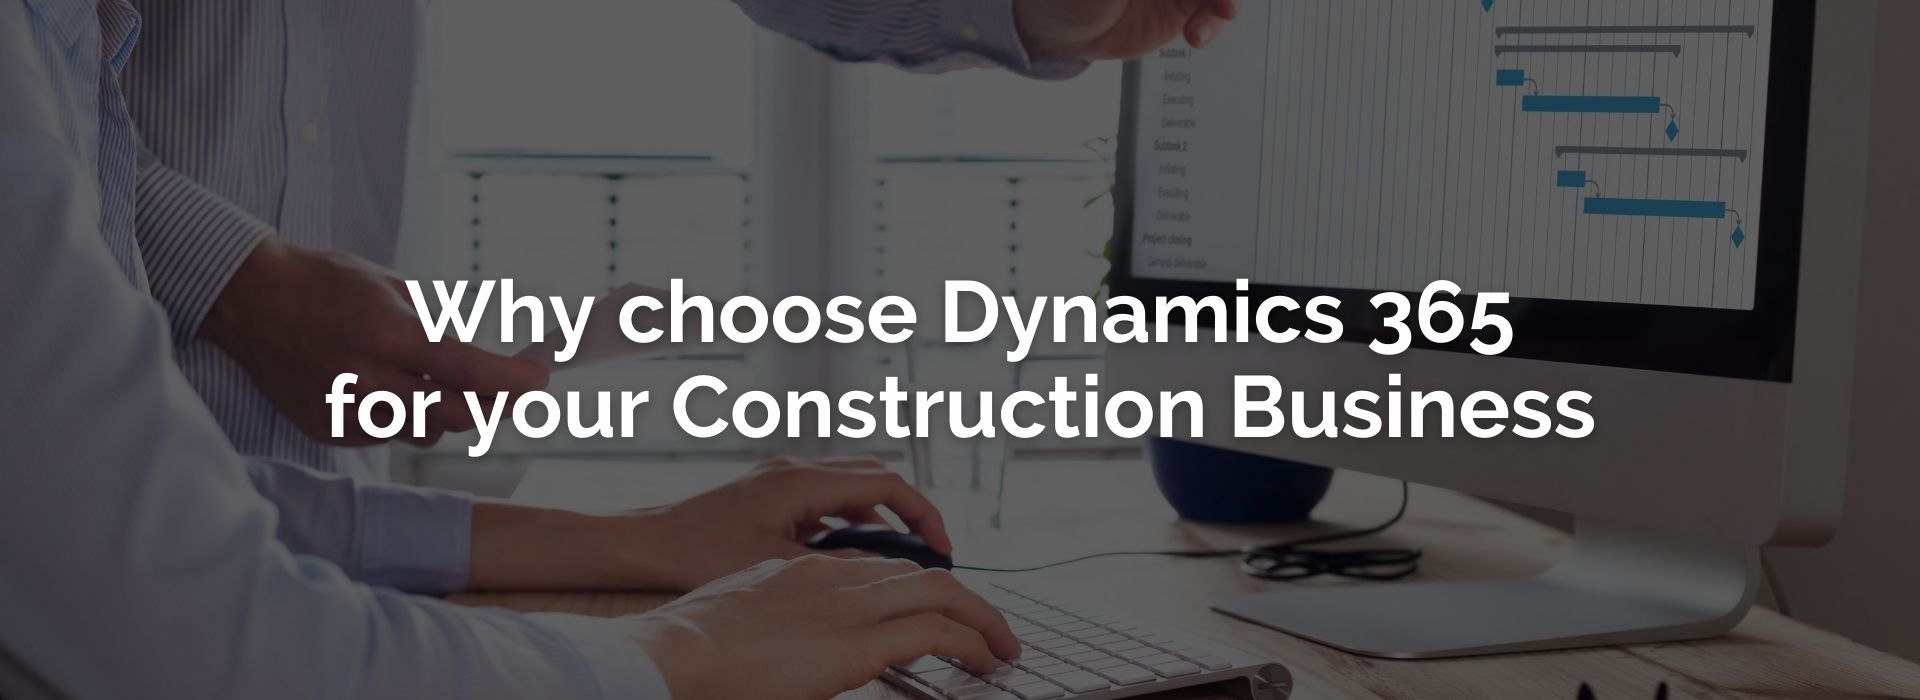 12 Reasons To Use Microsoft Dynamics 365 for Your Construction Business